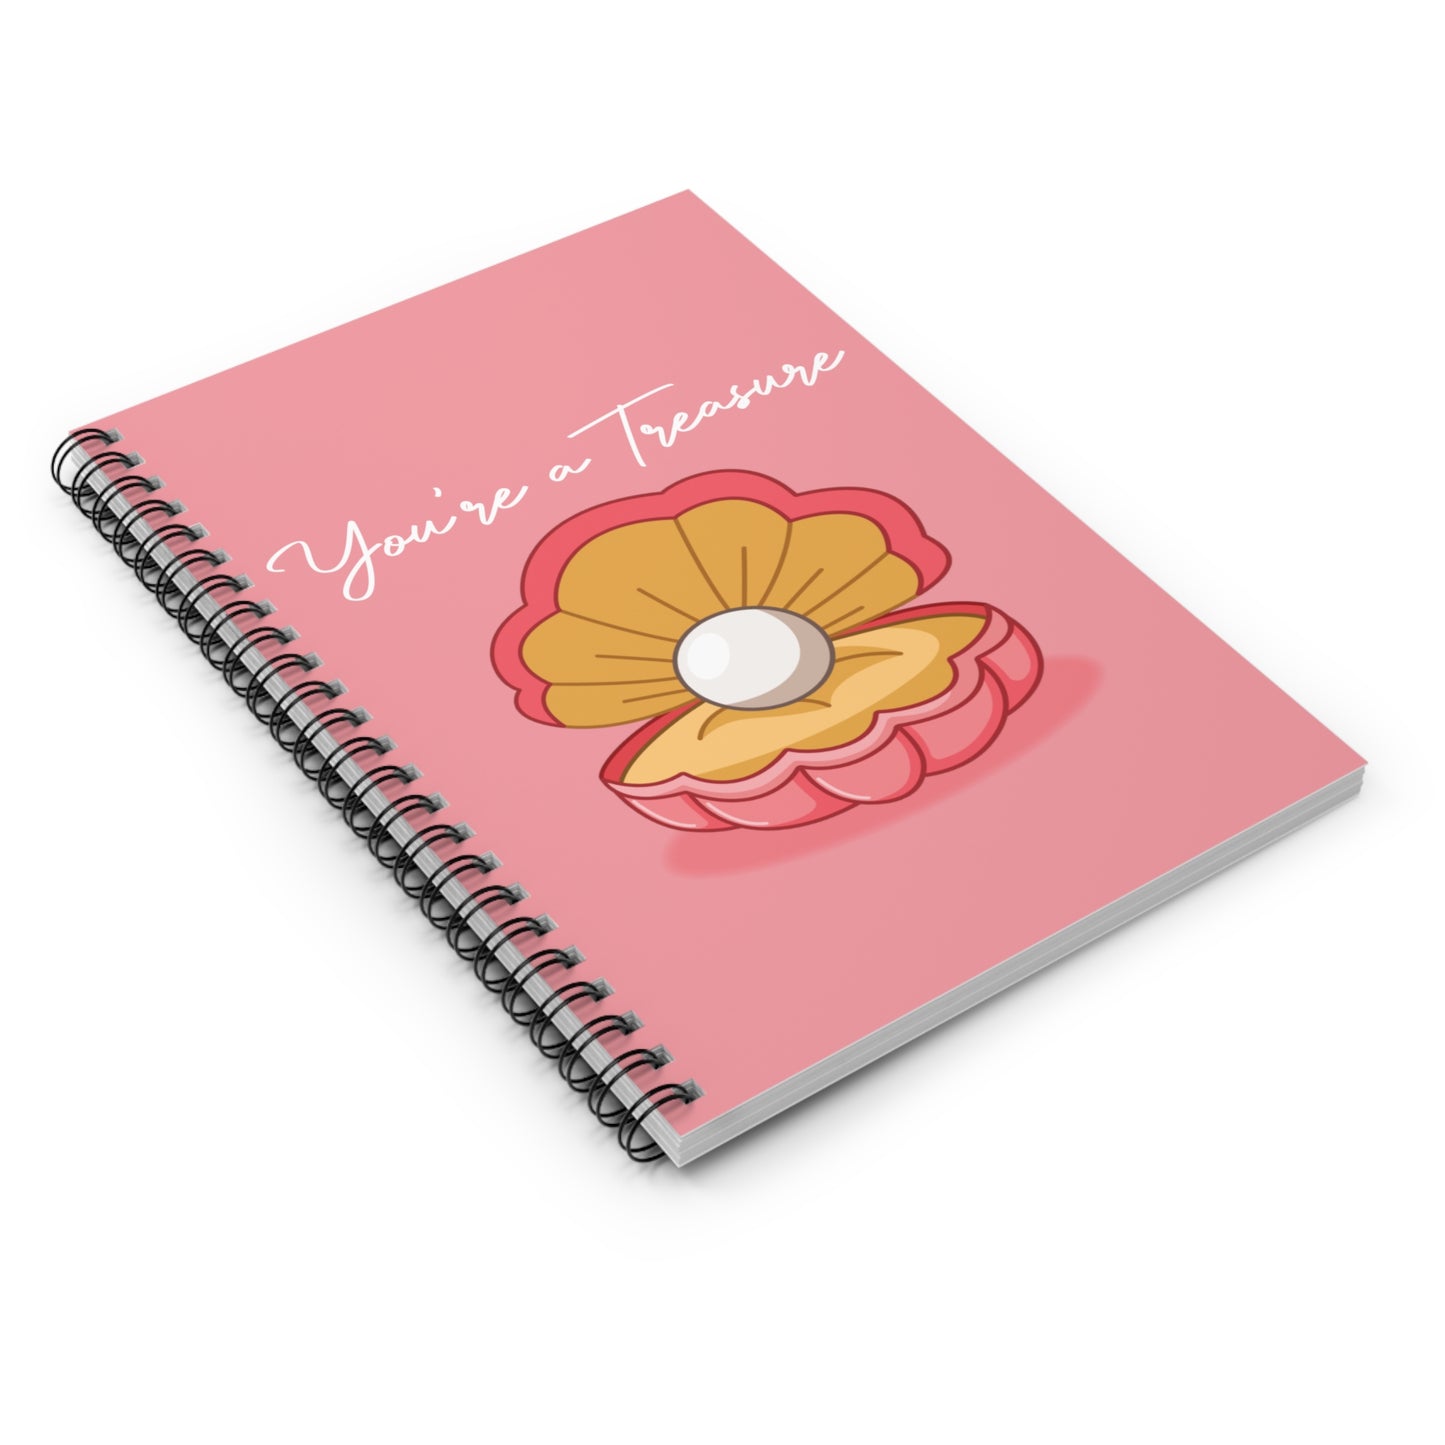 Mother of Pearl Spiral Notebook - Ruled Line